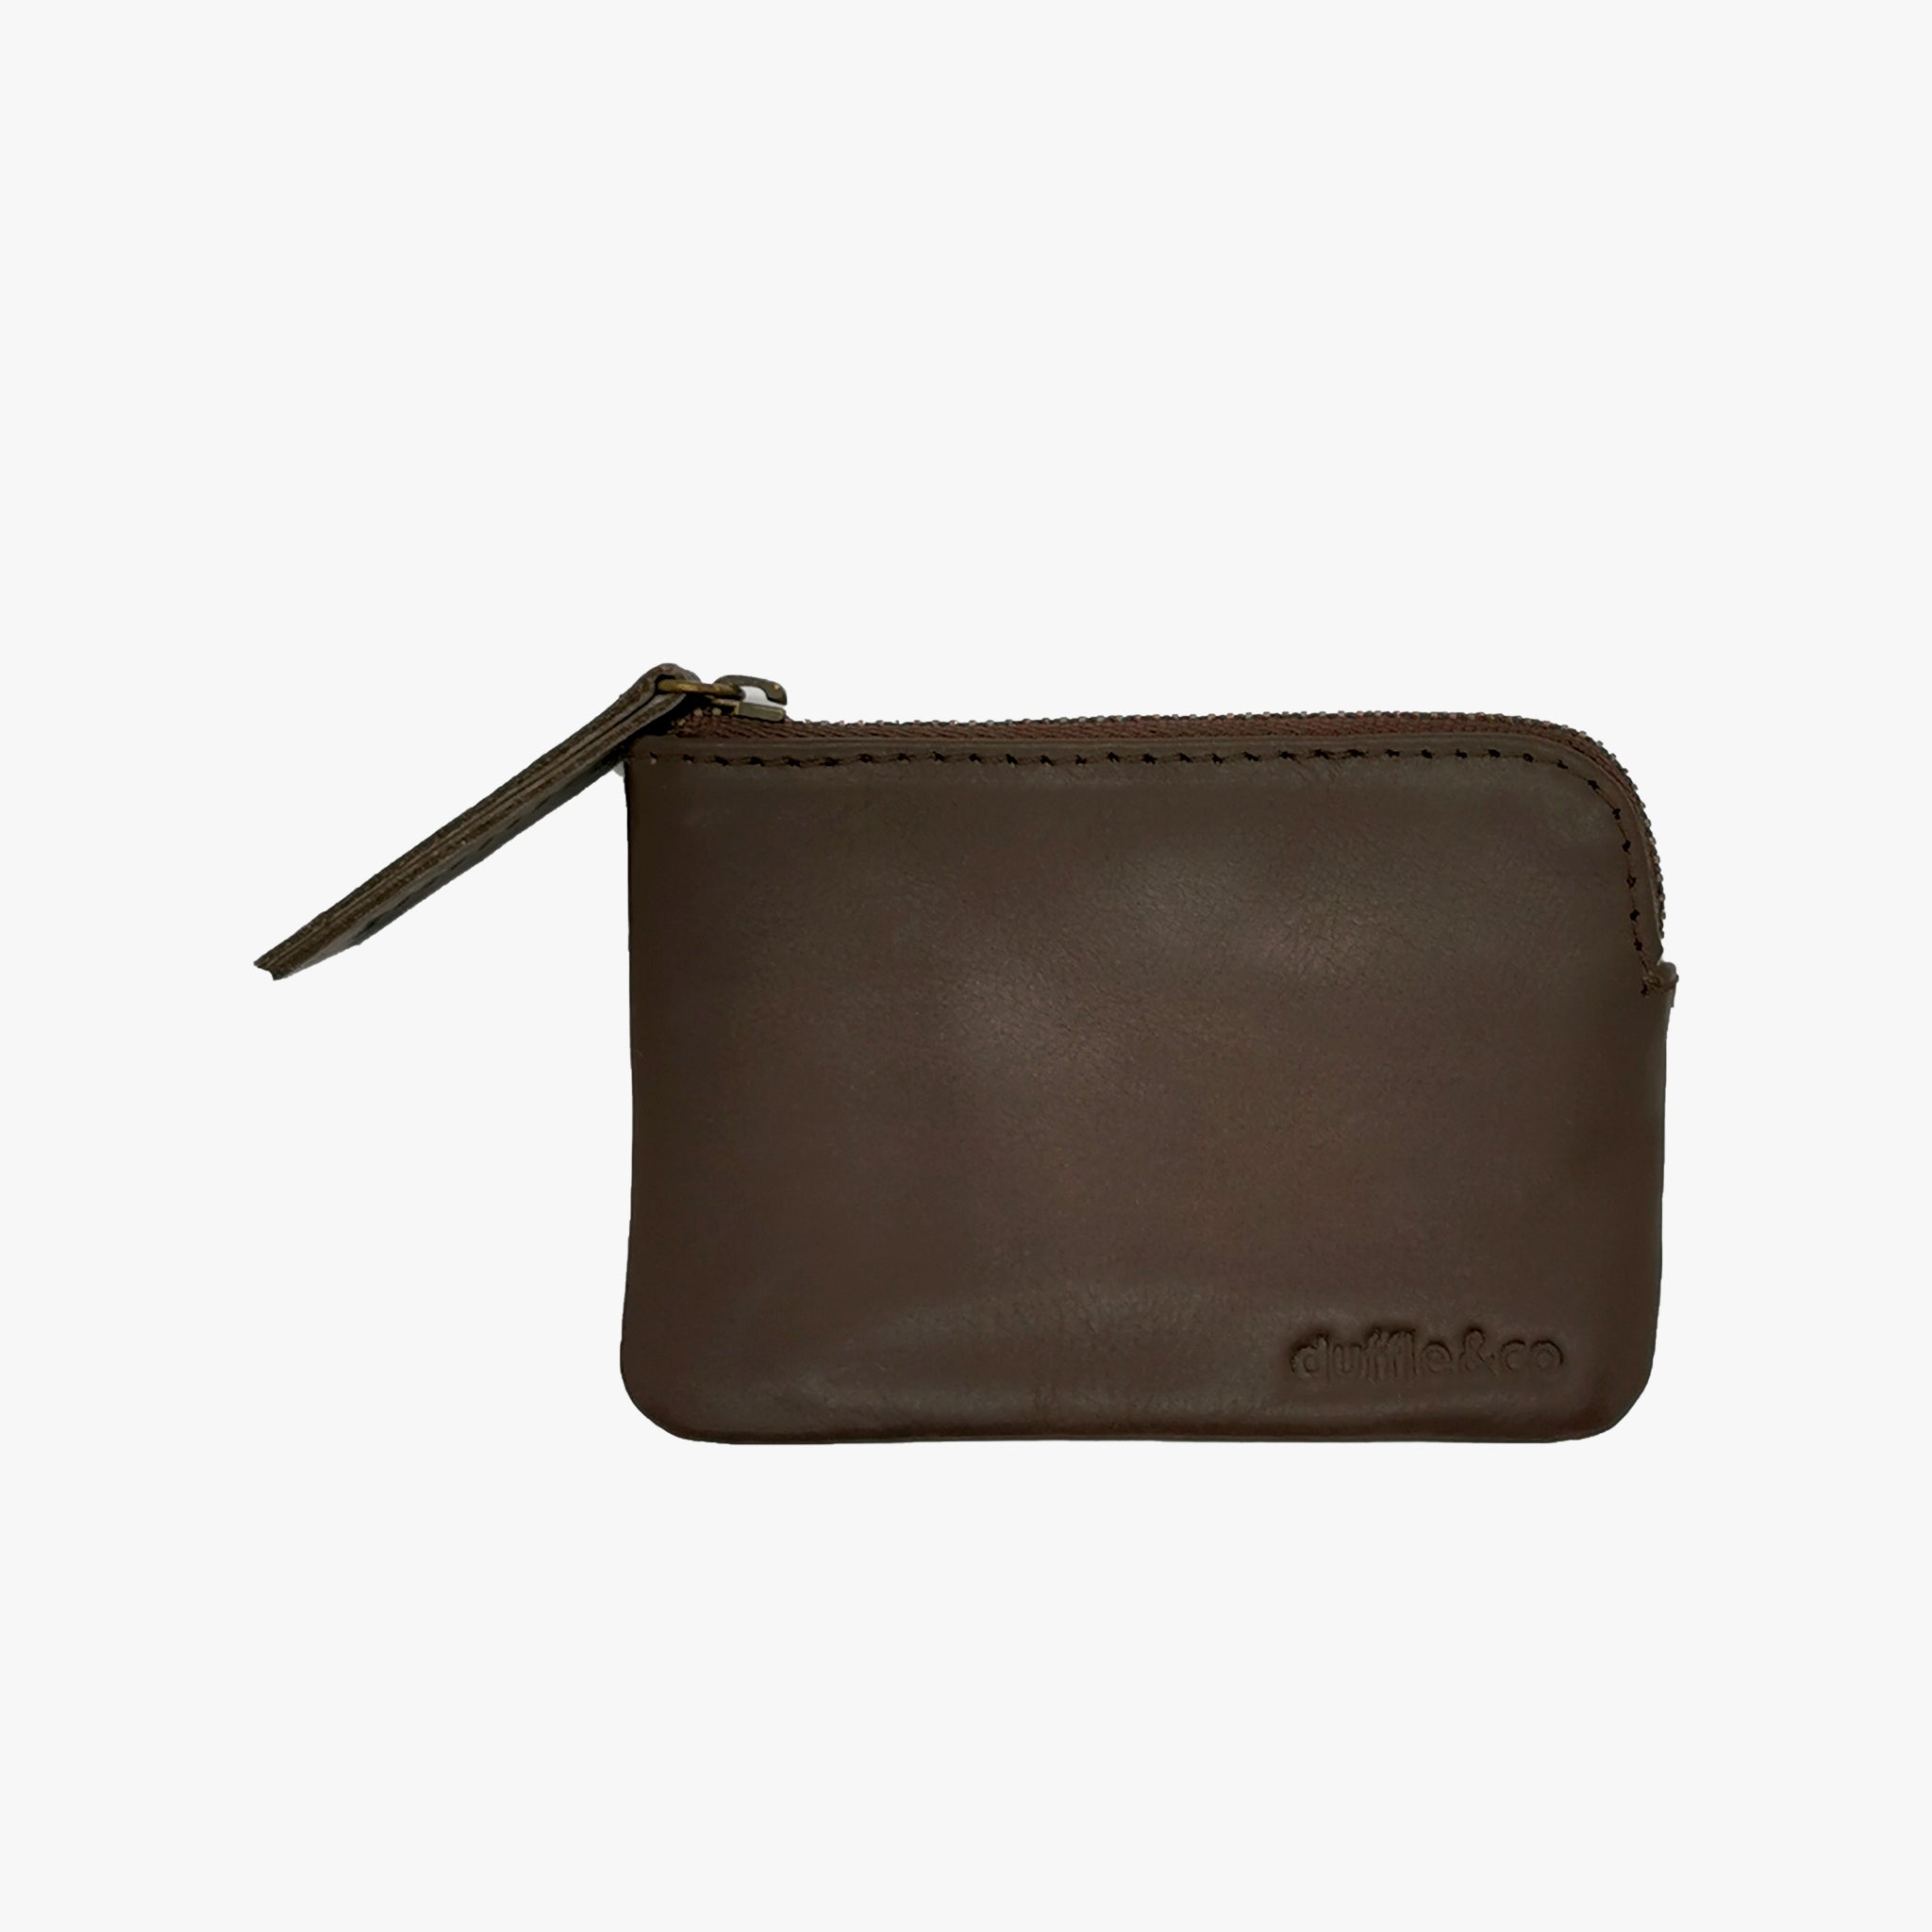 Cooke Pouch Leather Wallet in Chocolate Brown by Duffle&Co